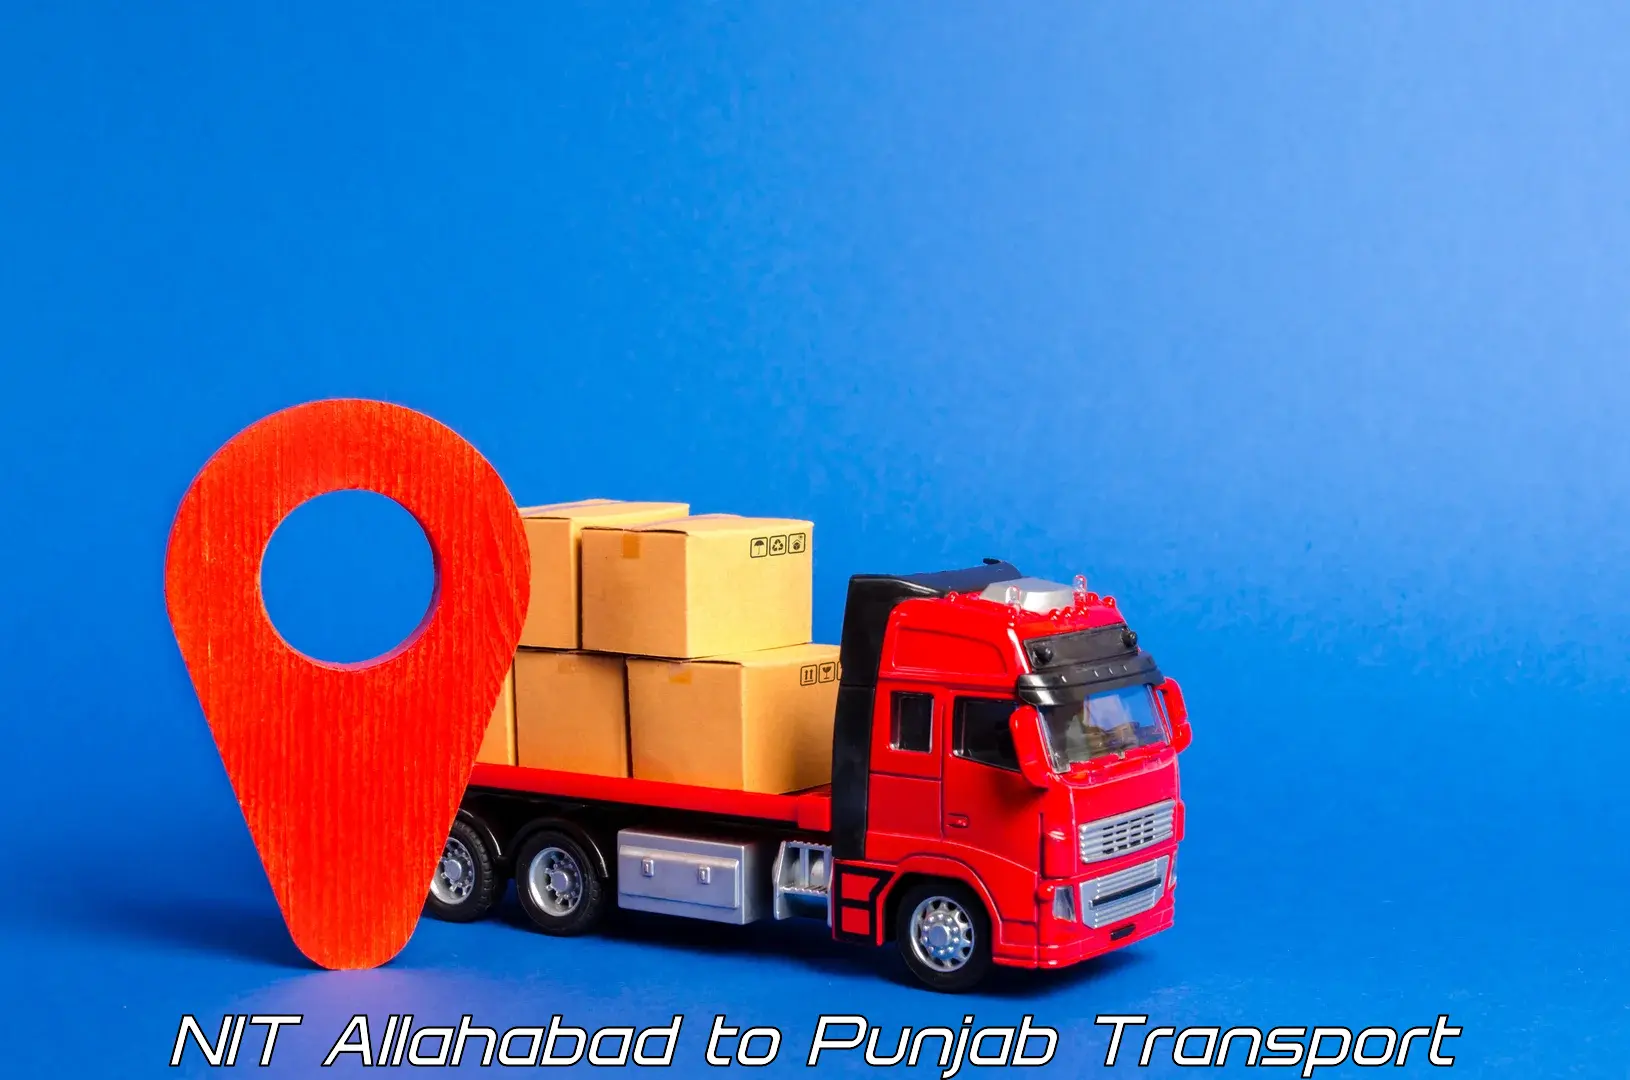 Transport bike from one state to another NIT Allahabad to Punjab